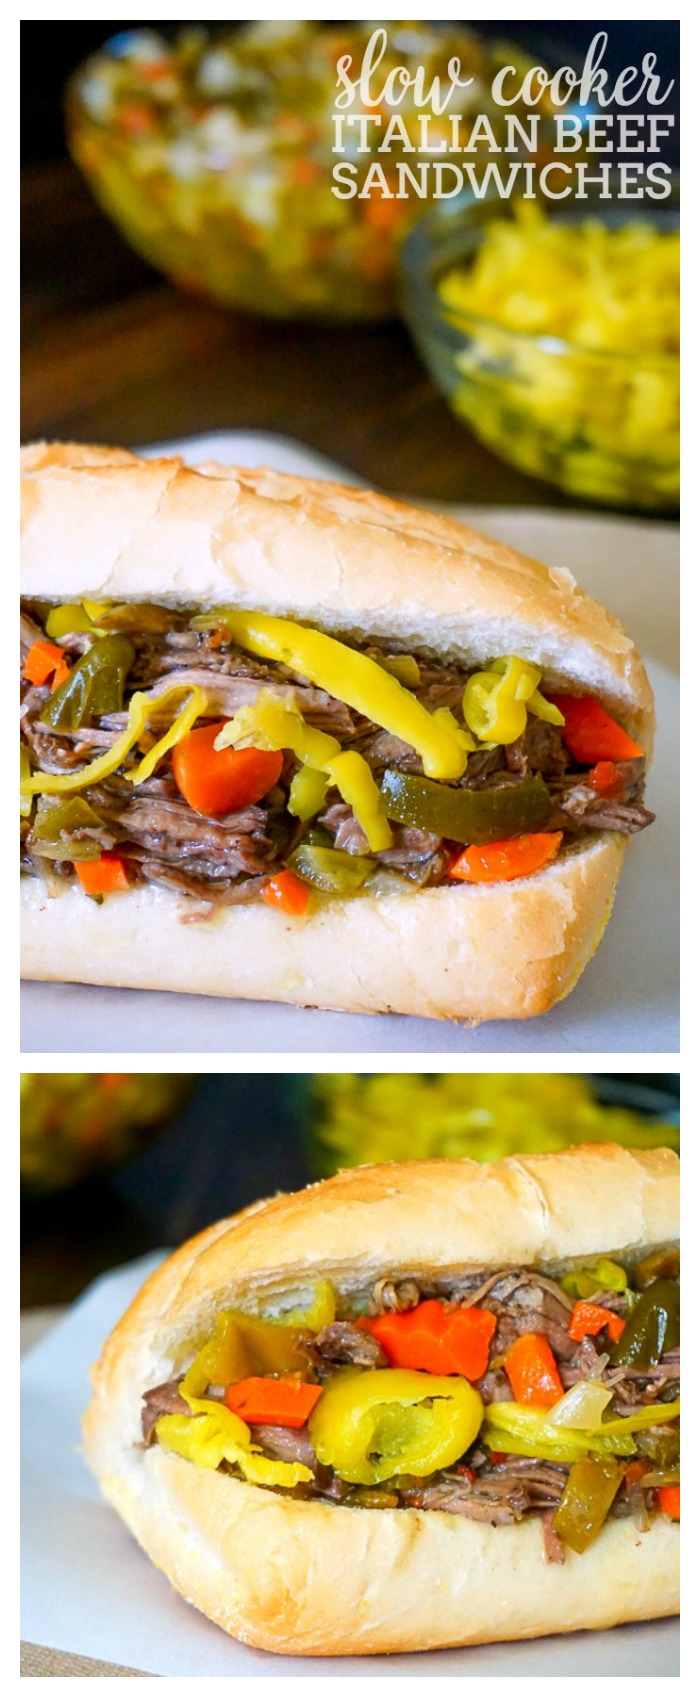 Slow Cooker Italian Beef Sandwiches - The Love Nerds